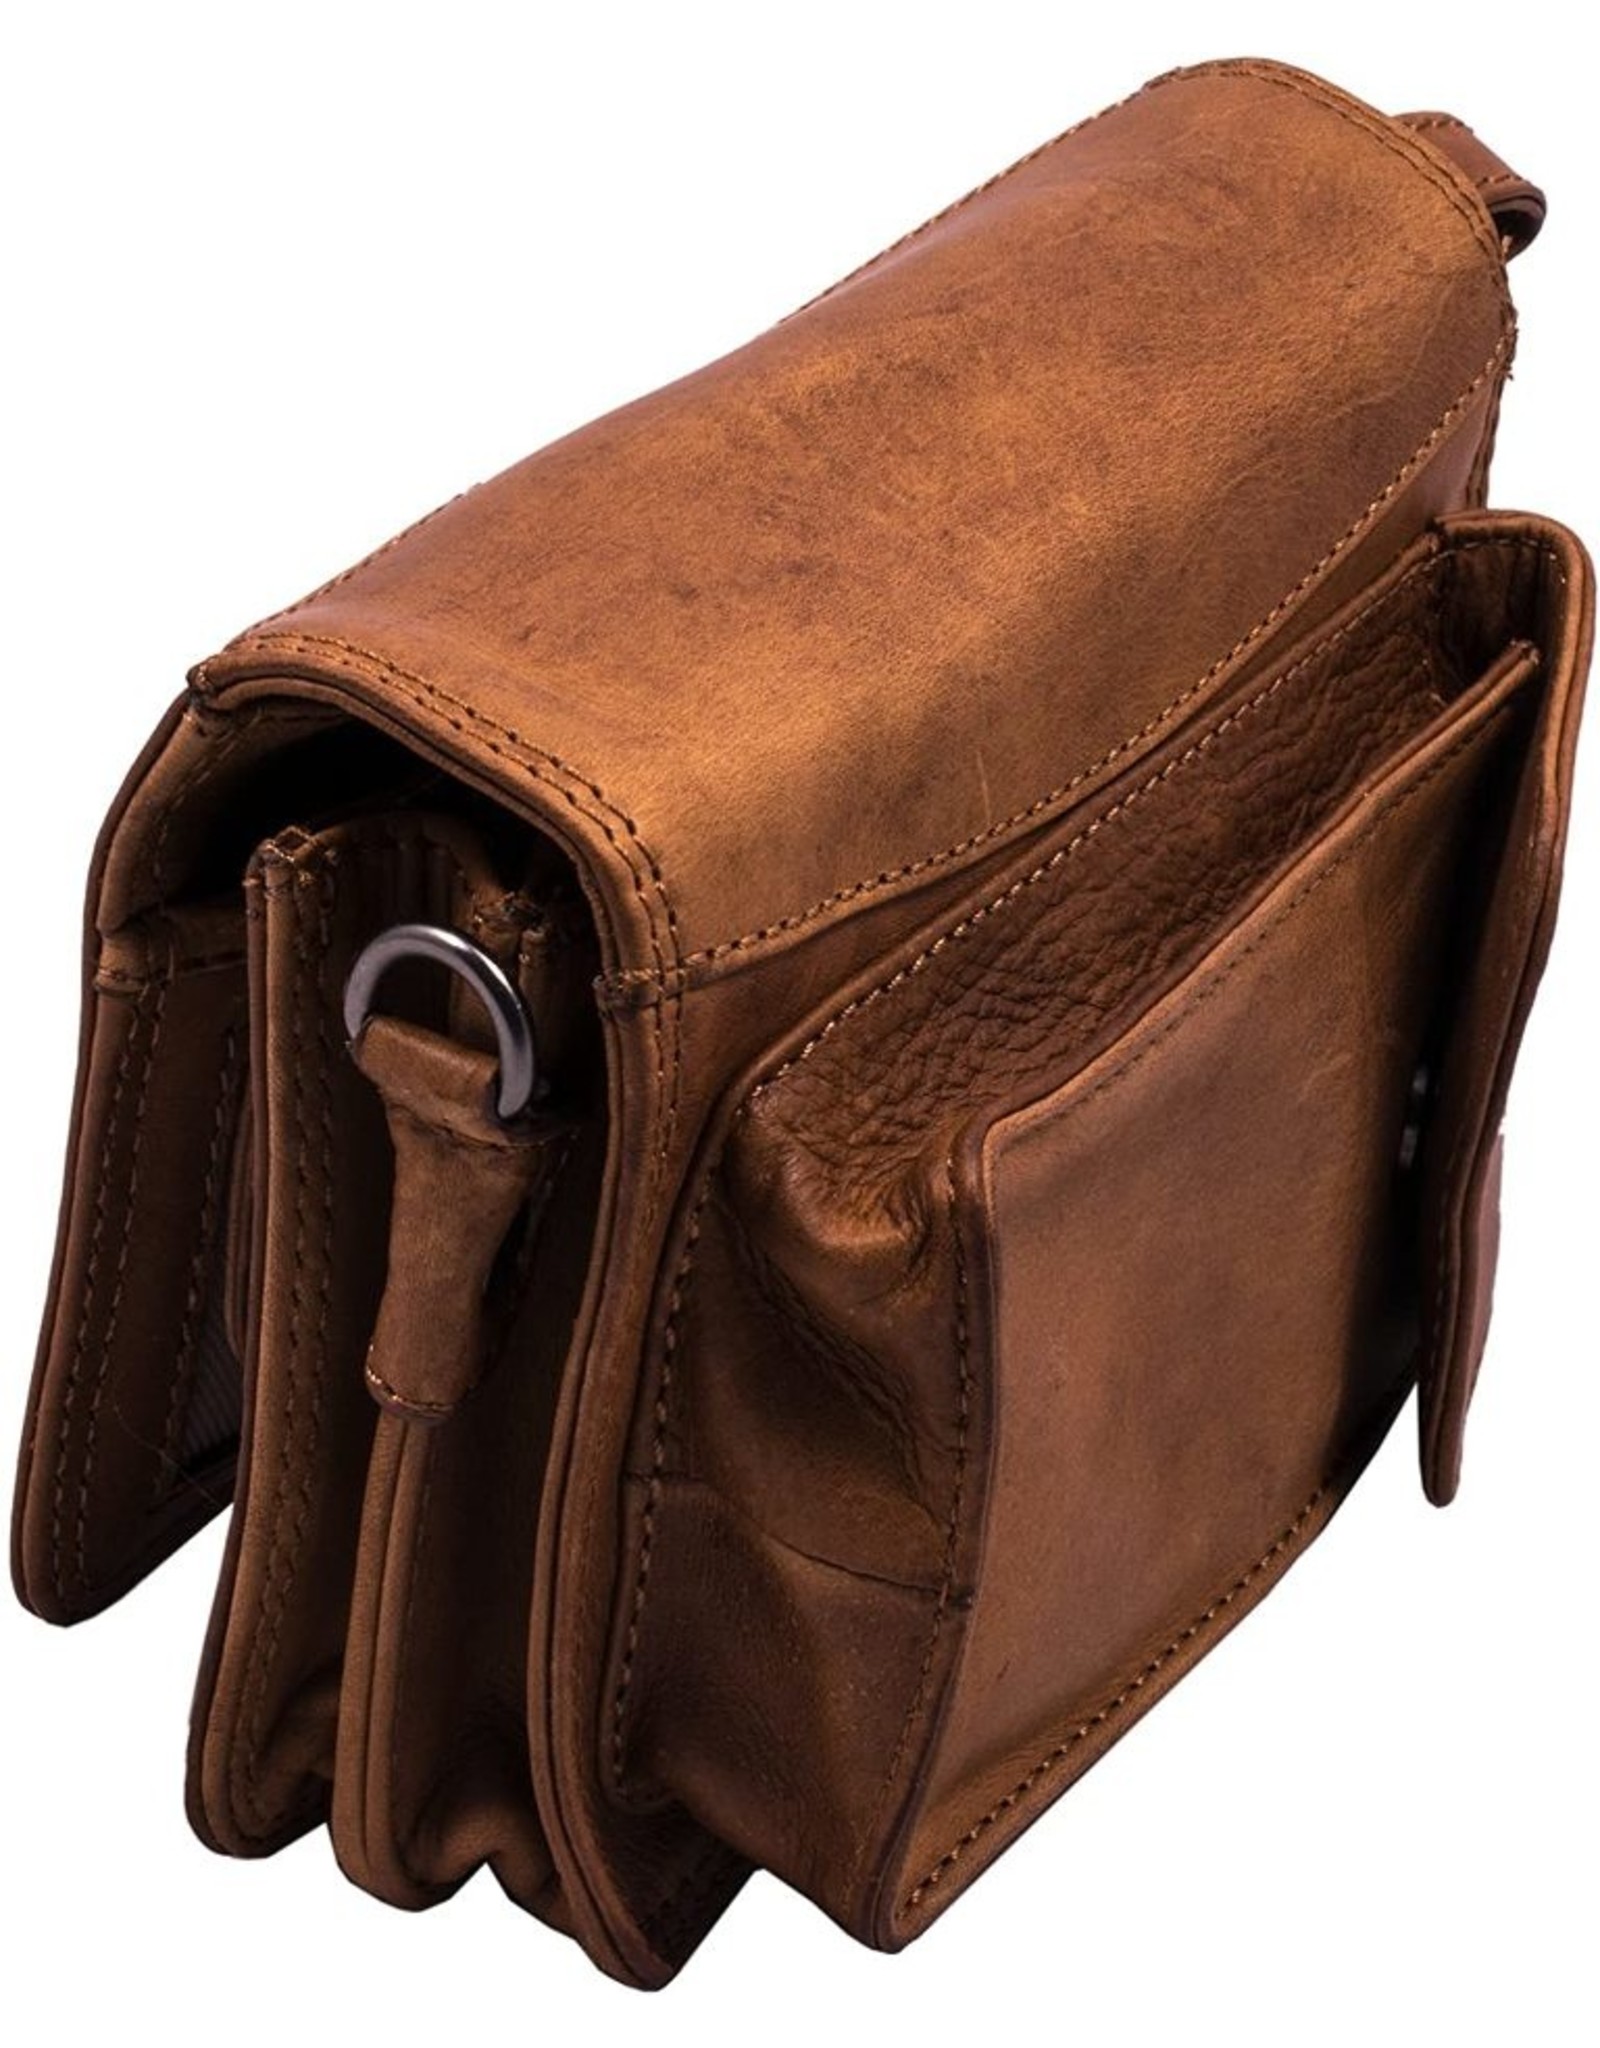 HillBurry Leather Festival bags, waist bags and belt bags - HillBurry Leather Shoulder Bag-Wallet-Phone holder